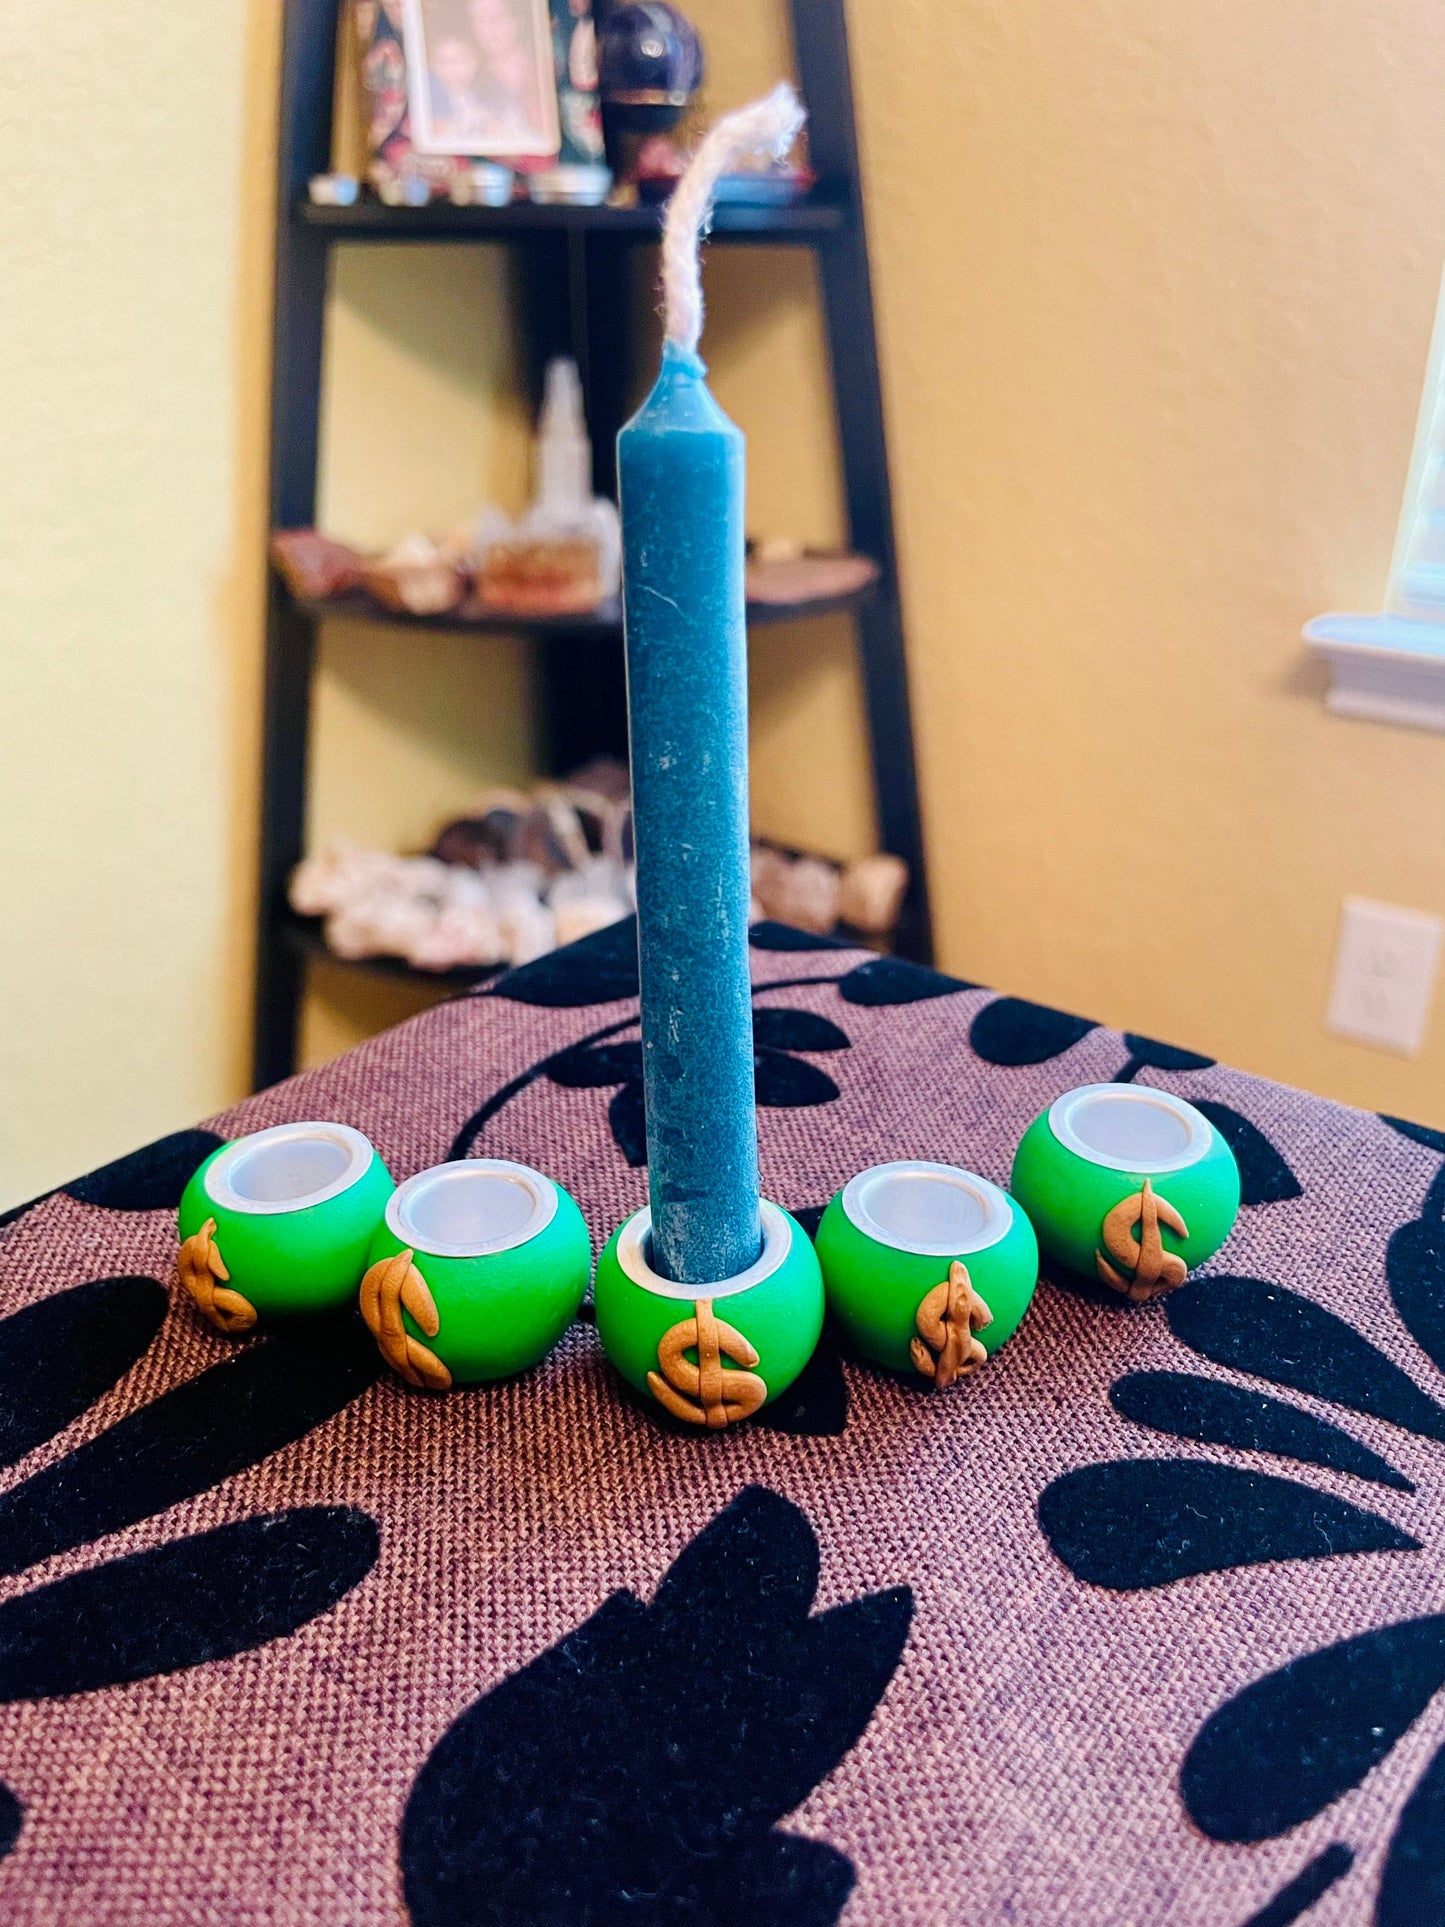 Money Draw Chime Candle Stick Holder - Green & Gold Clay - Handmade (Single)